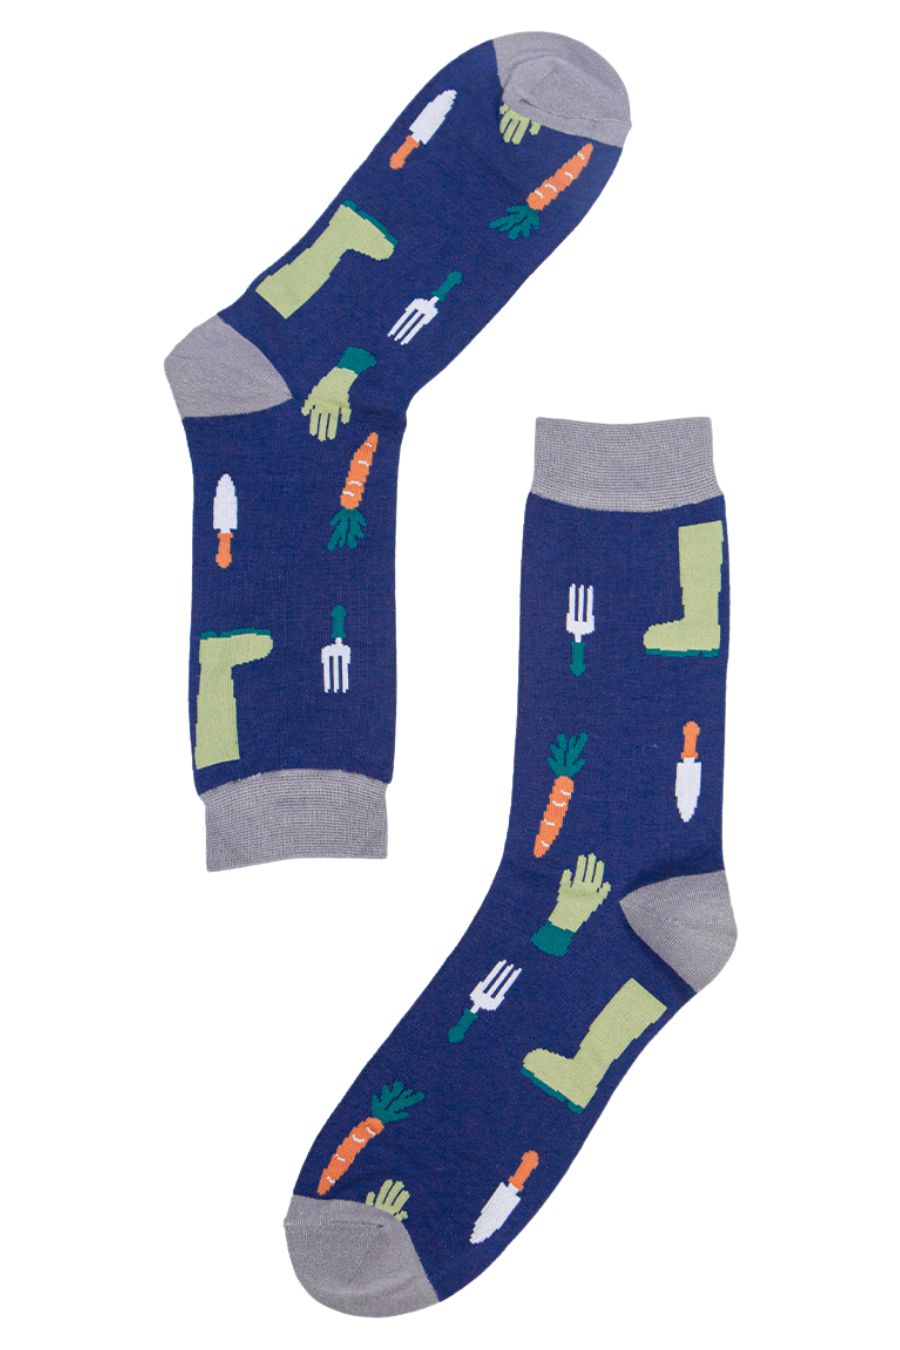 blue dress socks with carrots, gloves, boots and garden tools